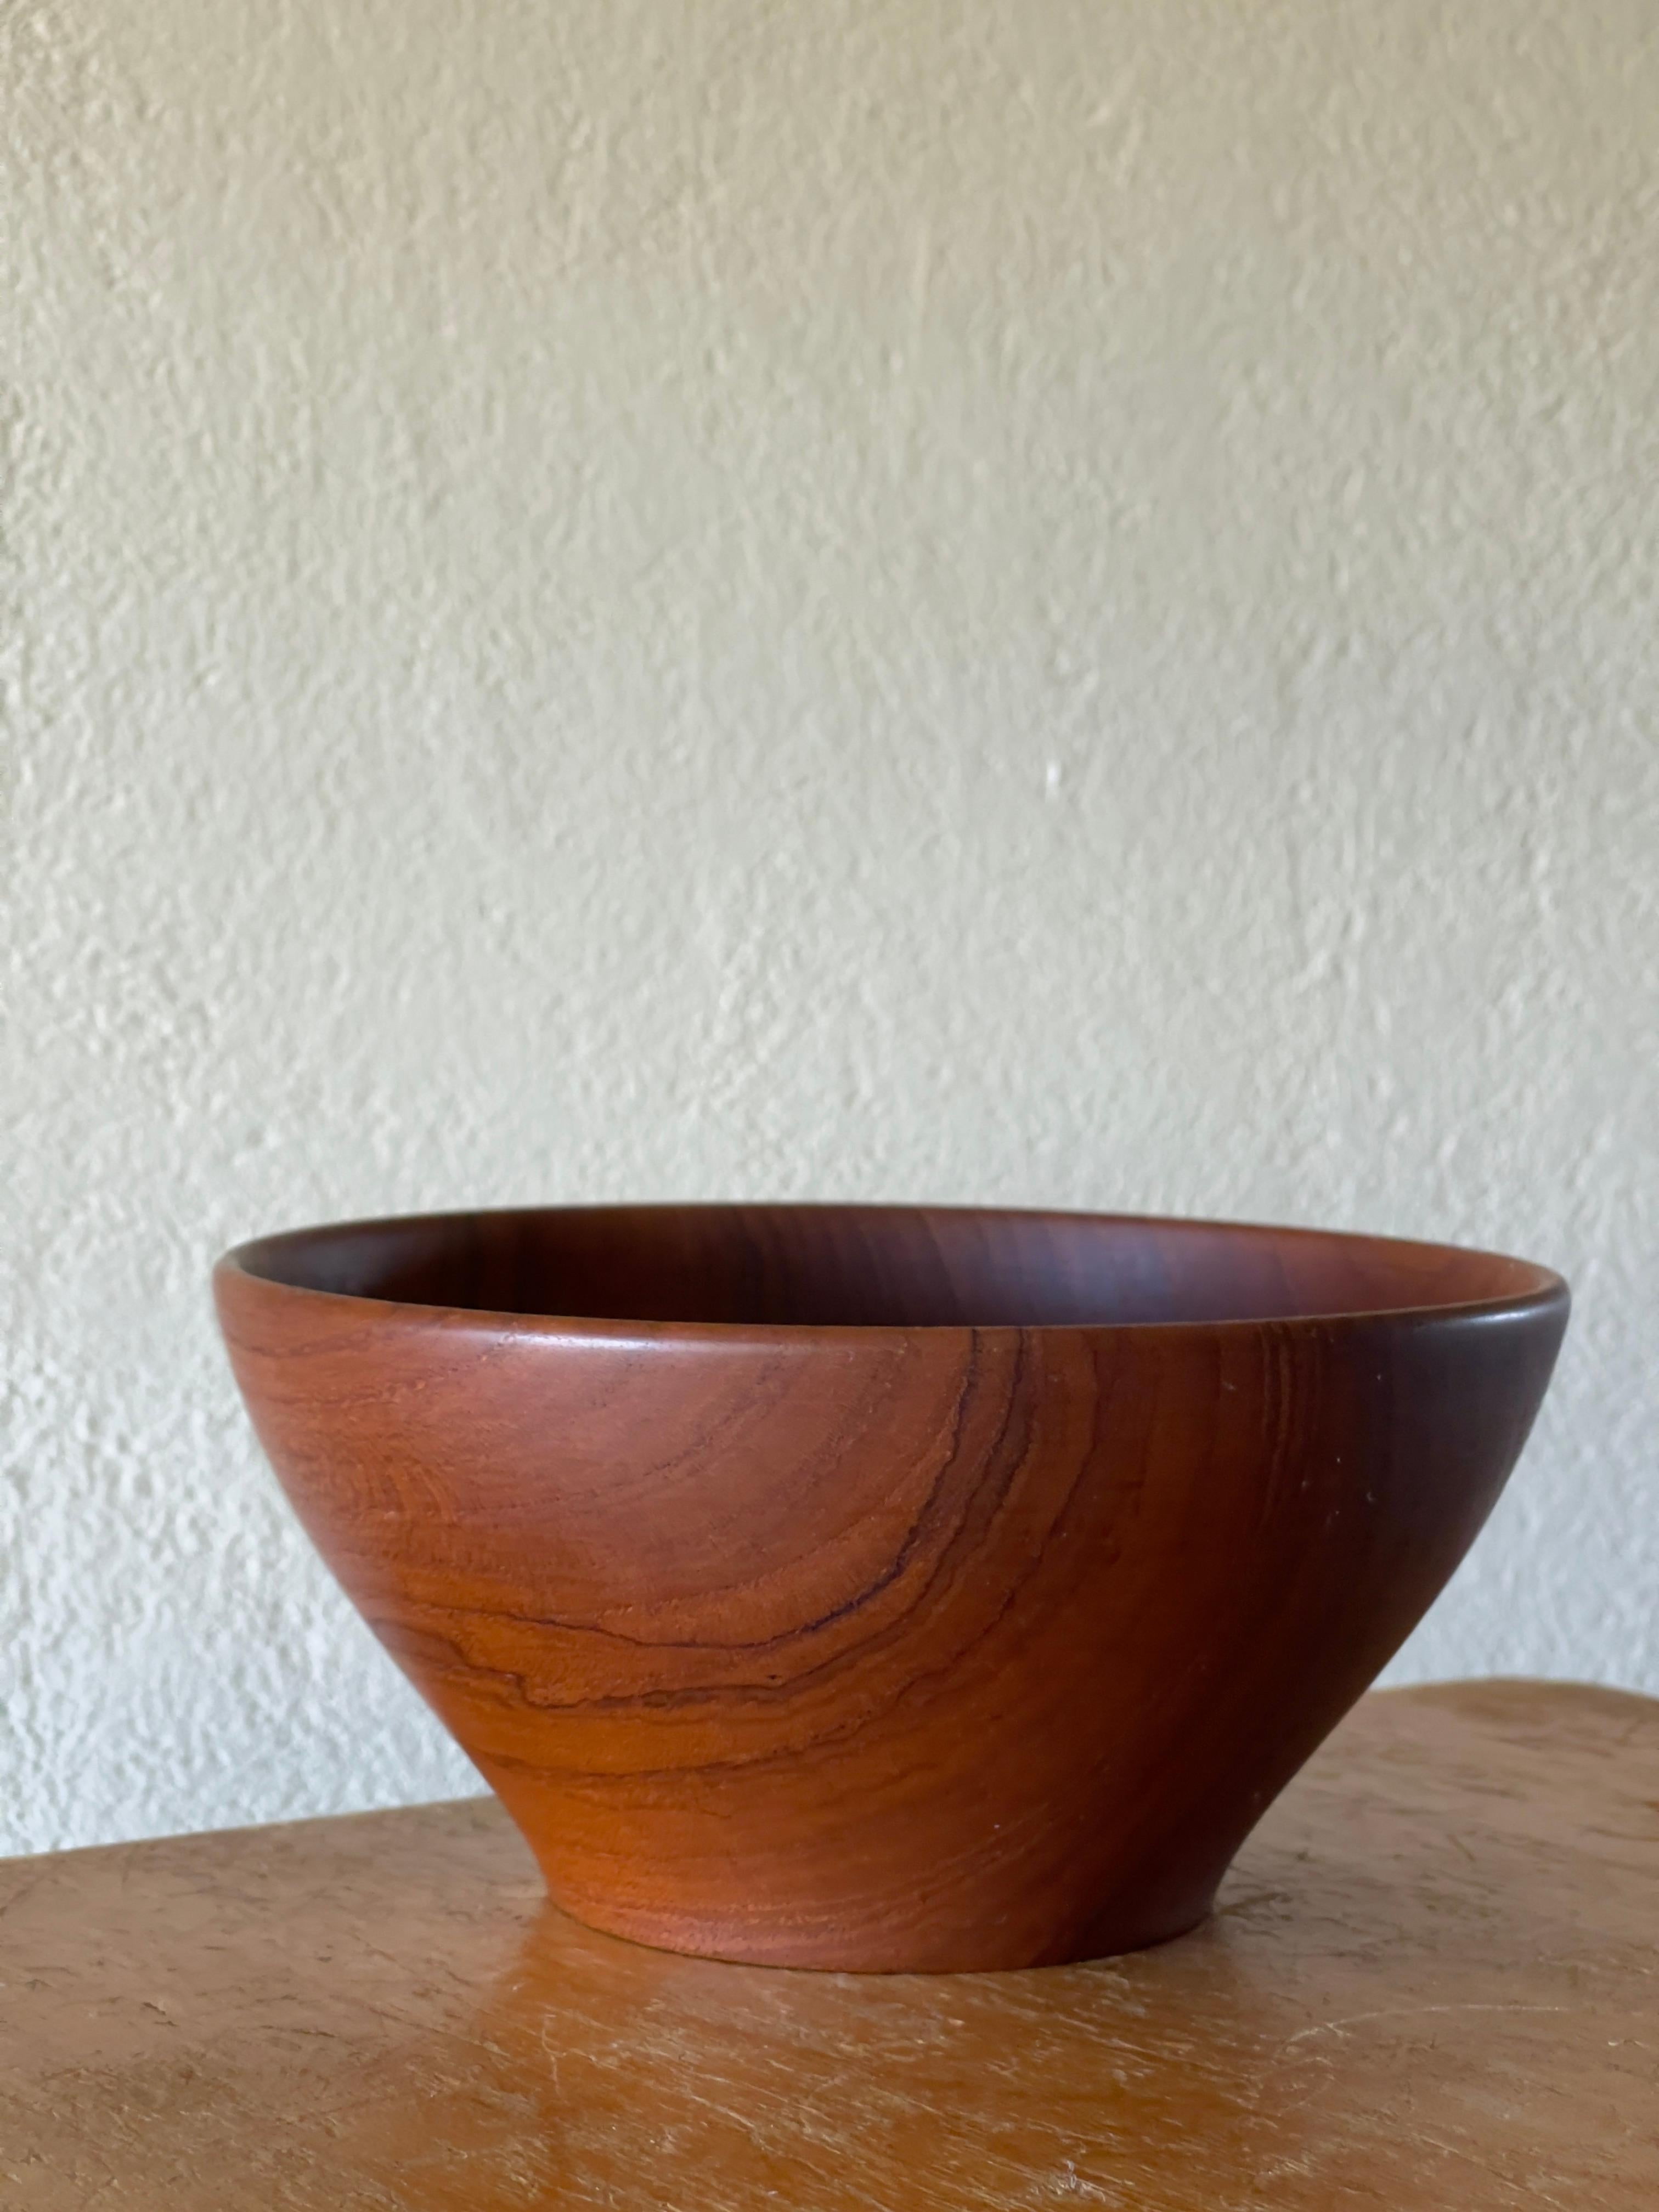 Woodwork 1960s Danish Modern Teak Wood Work Bowl in Great Condition For Sale